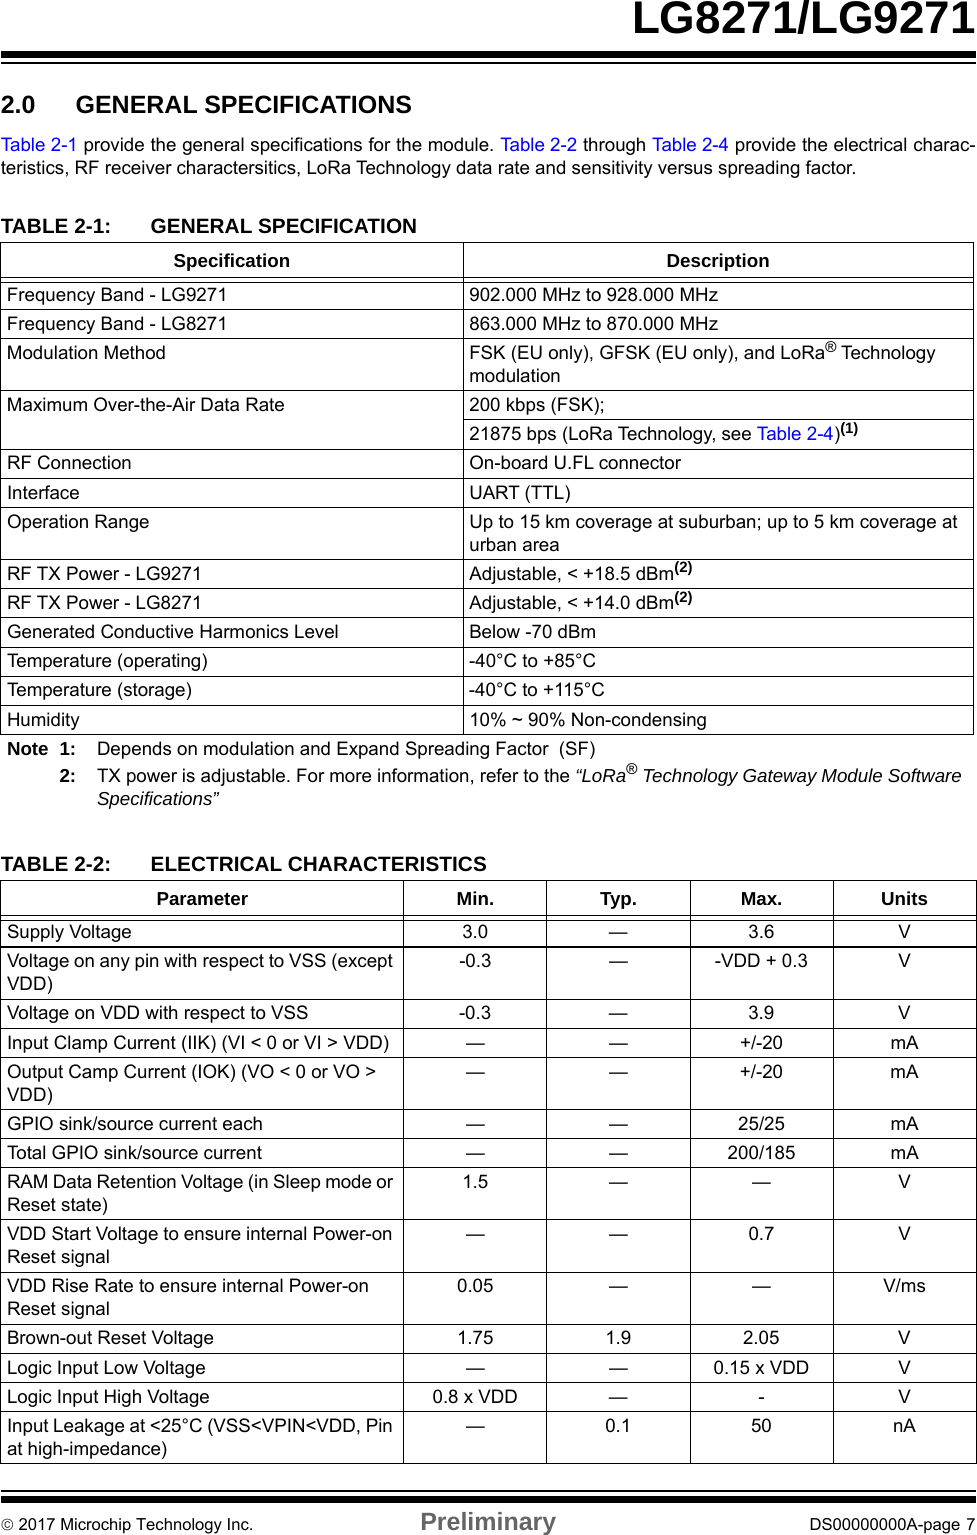  2017 Microchip Technology Inc. Preliminary DS00000000A-page 7LG8271/LG92712.0 GENERAL SPECIFICATIONSTable 2-1 provide the general specifications for the module. Table 2-2 through Table 2-4 provide the electrical charac-teristics, RF receiver charactersitics, LoRa Technology data rate and sensitivity versus spreading factor.TABLE 2-1: GENERAL SPECIFICATIONSpecification DescriptionFrequency Band - LG9271 902.000 MHz to 928.000 MHzFrequency Band - LG8271 863.000 MHz to 870.000 MHzModulation Method  FSK (EU only), GFSK (EU only), and LoRa® Technology modulationMaximum Over-the-Air Data Rate  200 kbps (FSK);21875 bps (LoRa Technology, see Ta b l e 2 -4)(1)RF Connection  On-board U.FL connectorInterface UART (TTL)Operation Range  Up to 15 km coverage at suburban; up to 5 km coverage at urban areaRF TX Power - LG9271 Adjustable, &lt; +18.5 dBm(2)RF TX Power - LG8271 Adjustable, &lt; +14.0 dBm(2)Generated Conductive Harmonics Level Below -70 dBmTemperature (operating) -40°C to +85°CTemperature (storage)  -40°C to +115°CHumidity  10% ~ 90% Non-condensingNote 1: Depends on modulation and Expand Spreading Factor  (SF)2: TX power is adjustable. For more information, refer to the “LoRa® Technology Gateway Module Software Specifications”TABLE 2-2: ELECTRICAL CHARACTERISTICSParameter Min. Typ. Max. UnitsSupply Voltage  3.0 — 3.6 VVoltage on any pin with respect to VSS (except VDD) -0.3 — -VDD + 0.3 VVoltage on VDD with respect to VSS  -0.3  — 3.9  VInput Clamp Current (IIK) (VI &lt; 0 or VI &gt; VDD)  — — +/-20  mAOutput Camp Current (IOK) (VO &lt; 0 or VO &gt; VDD) ——+/-20mAGPIO sink/source current each  — — 25/25 mATotal GPIO sink/source current  — — 200/185 mARAM Data Retention Voltage (in Sleep mode or Reset state) 1.5   — — VVDD Start Voltage to ensure internal Power-on Reset signal ——0.7VVDD Rise Rate to ensure internal Power-on Reset signal 0.05 — — V/msBrown-out Reset Voltage  1.75  1.9 2.05 VLogic Input Low Voltage  — — 0.15 x VDD VLogic Input High Voltage  0.8 x VDD    — - VInput Leakage at &lt;25°C (VSS&lt;VPIN&lt;VDD, Pin at high-impedance)— 0.1 50 nA